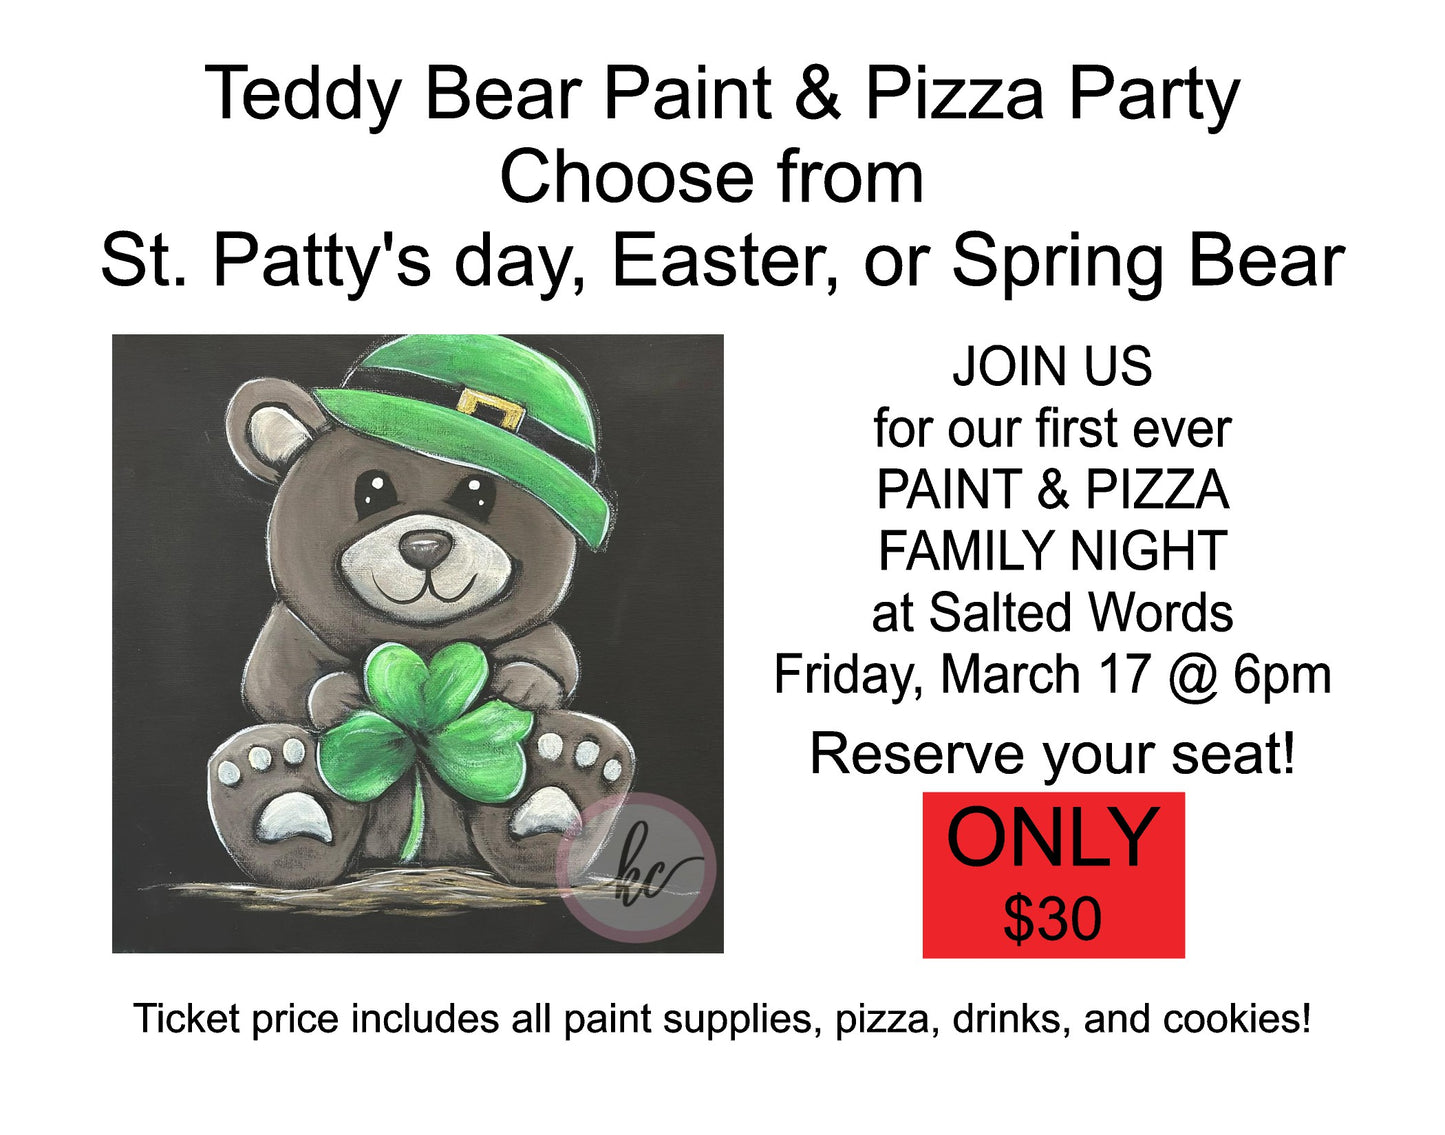 March 17 - Friday Family Night Teddy Bear @ Salted Words